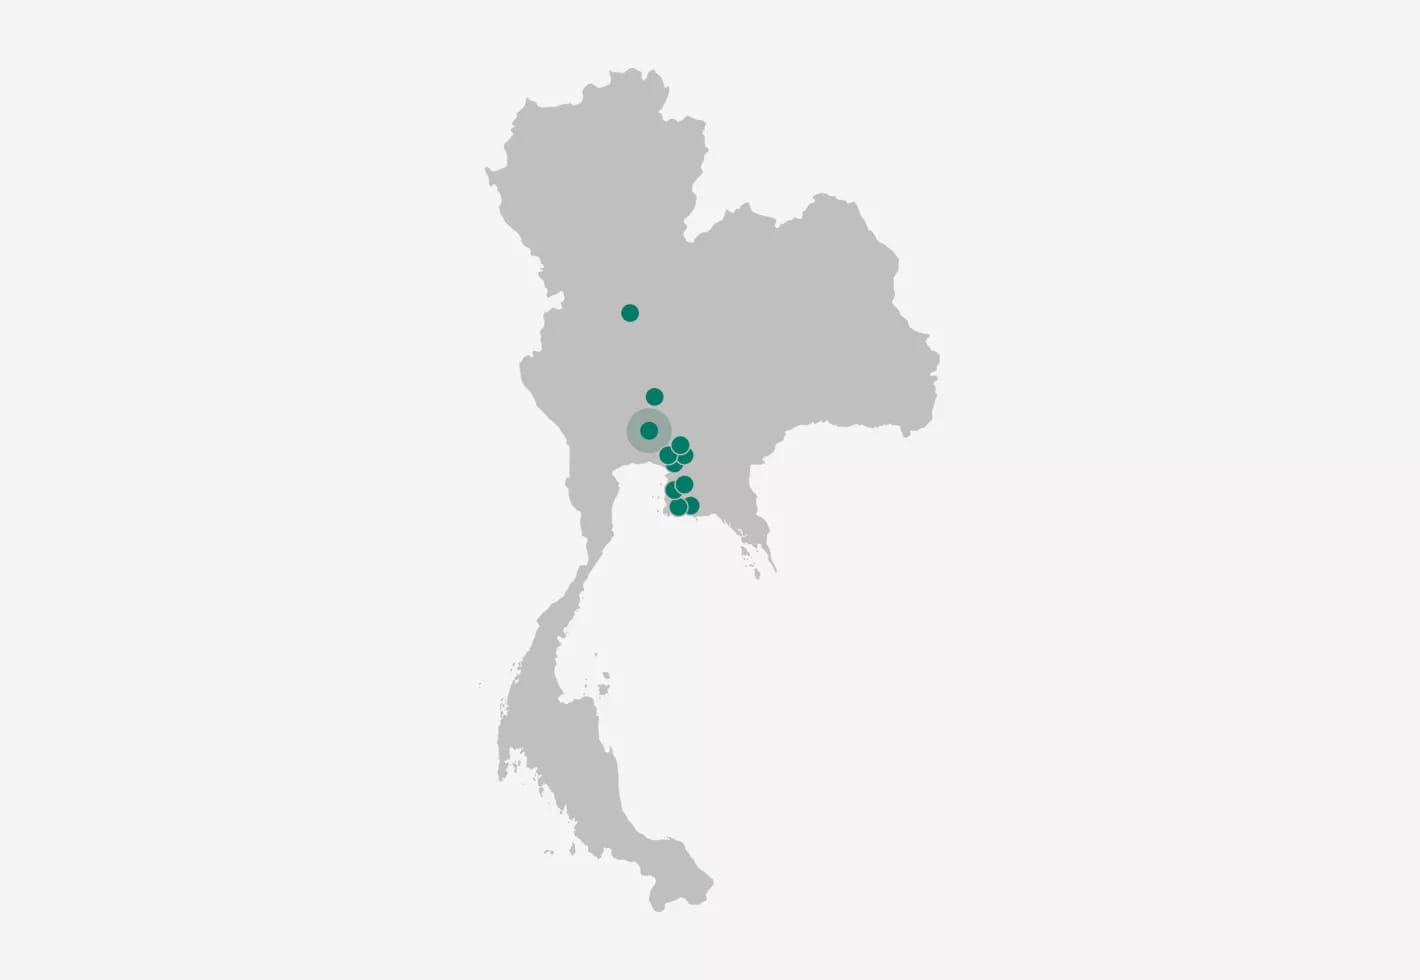 Our presence in Thailand